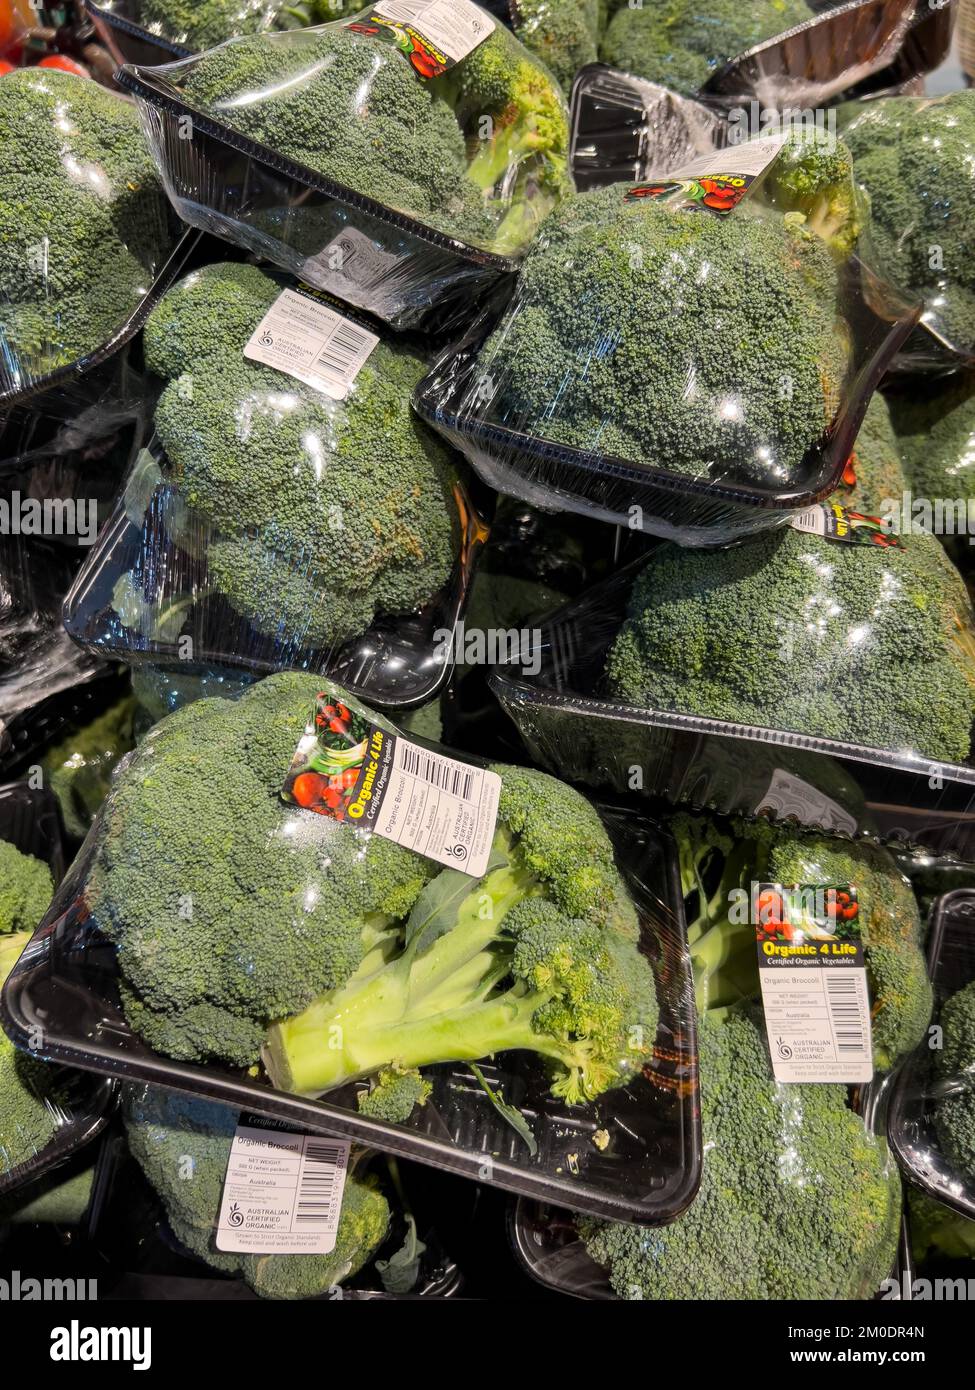 Broccoli plants wrapped up to maintain freshness and prevent decontamination. Stock Photo